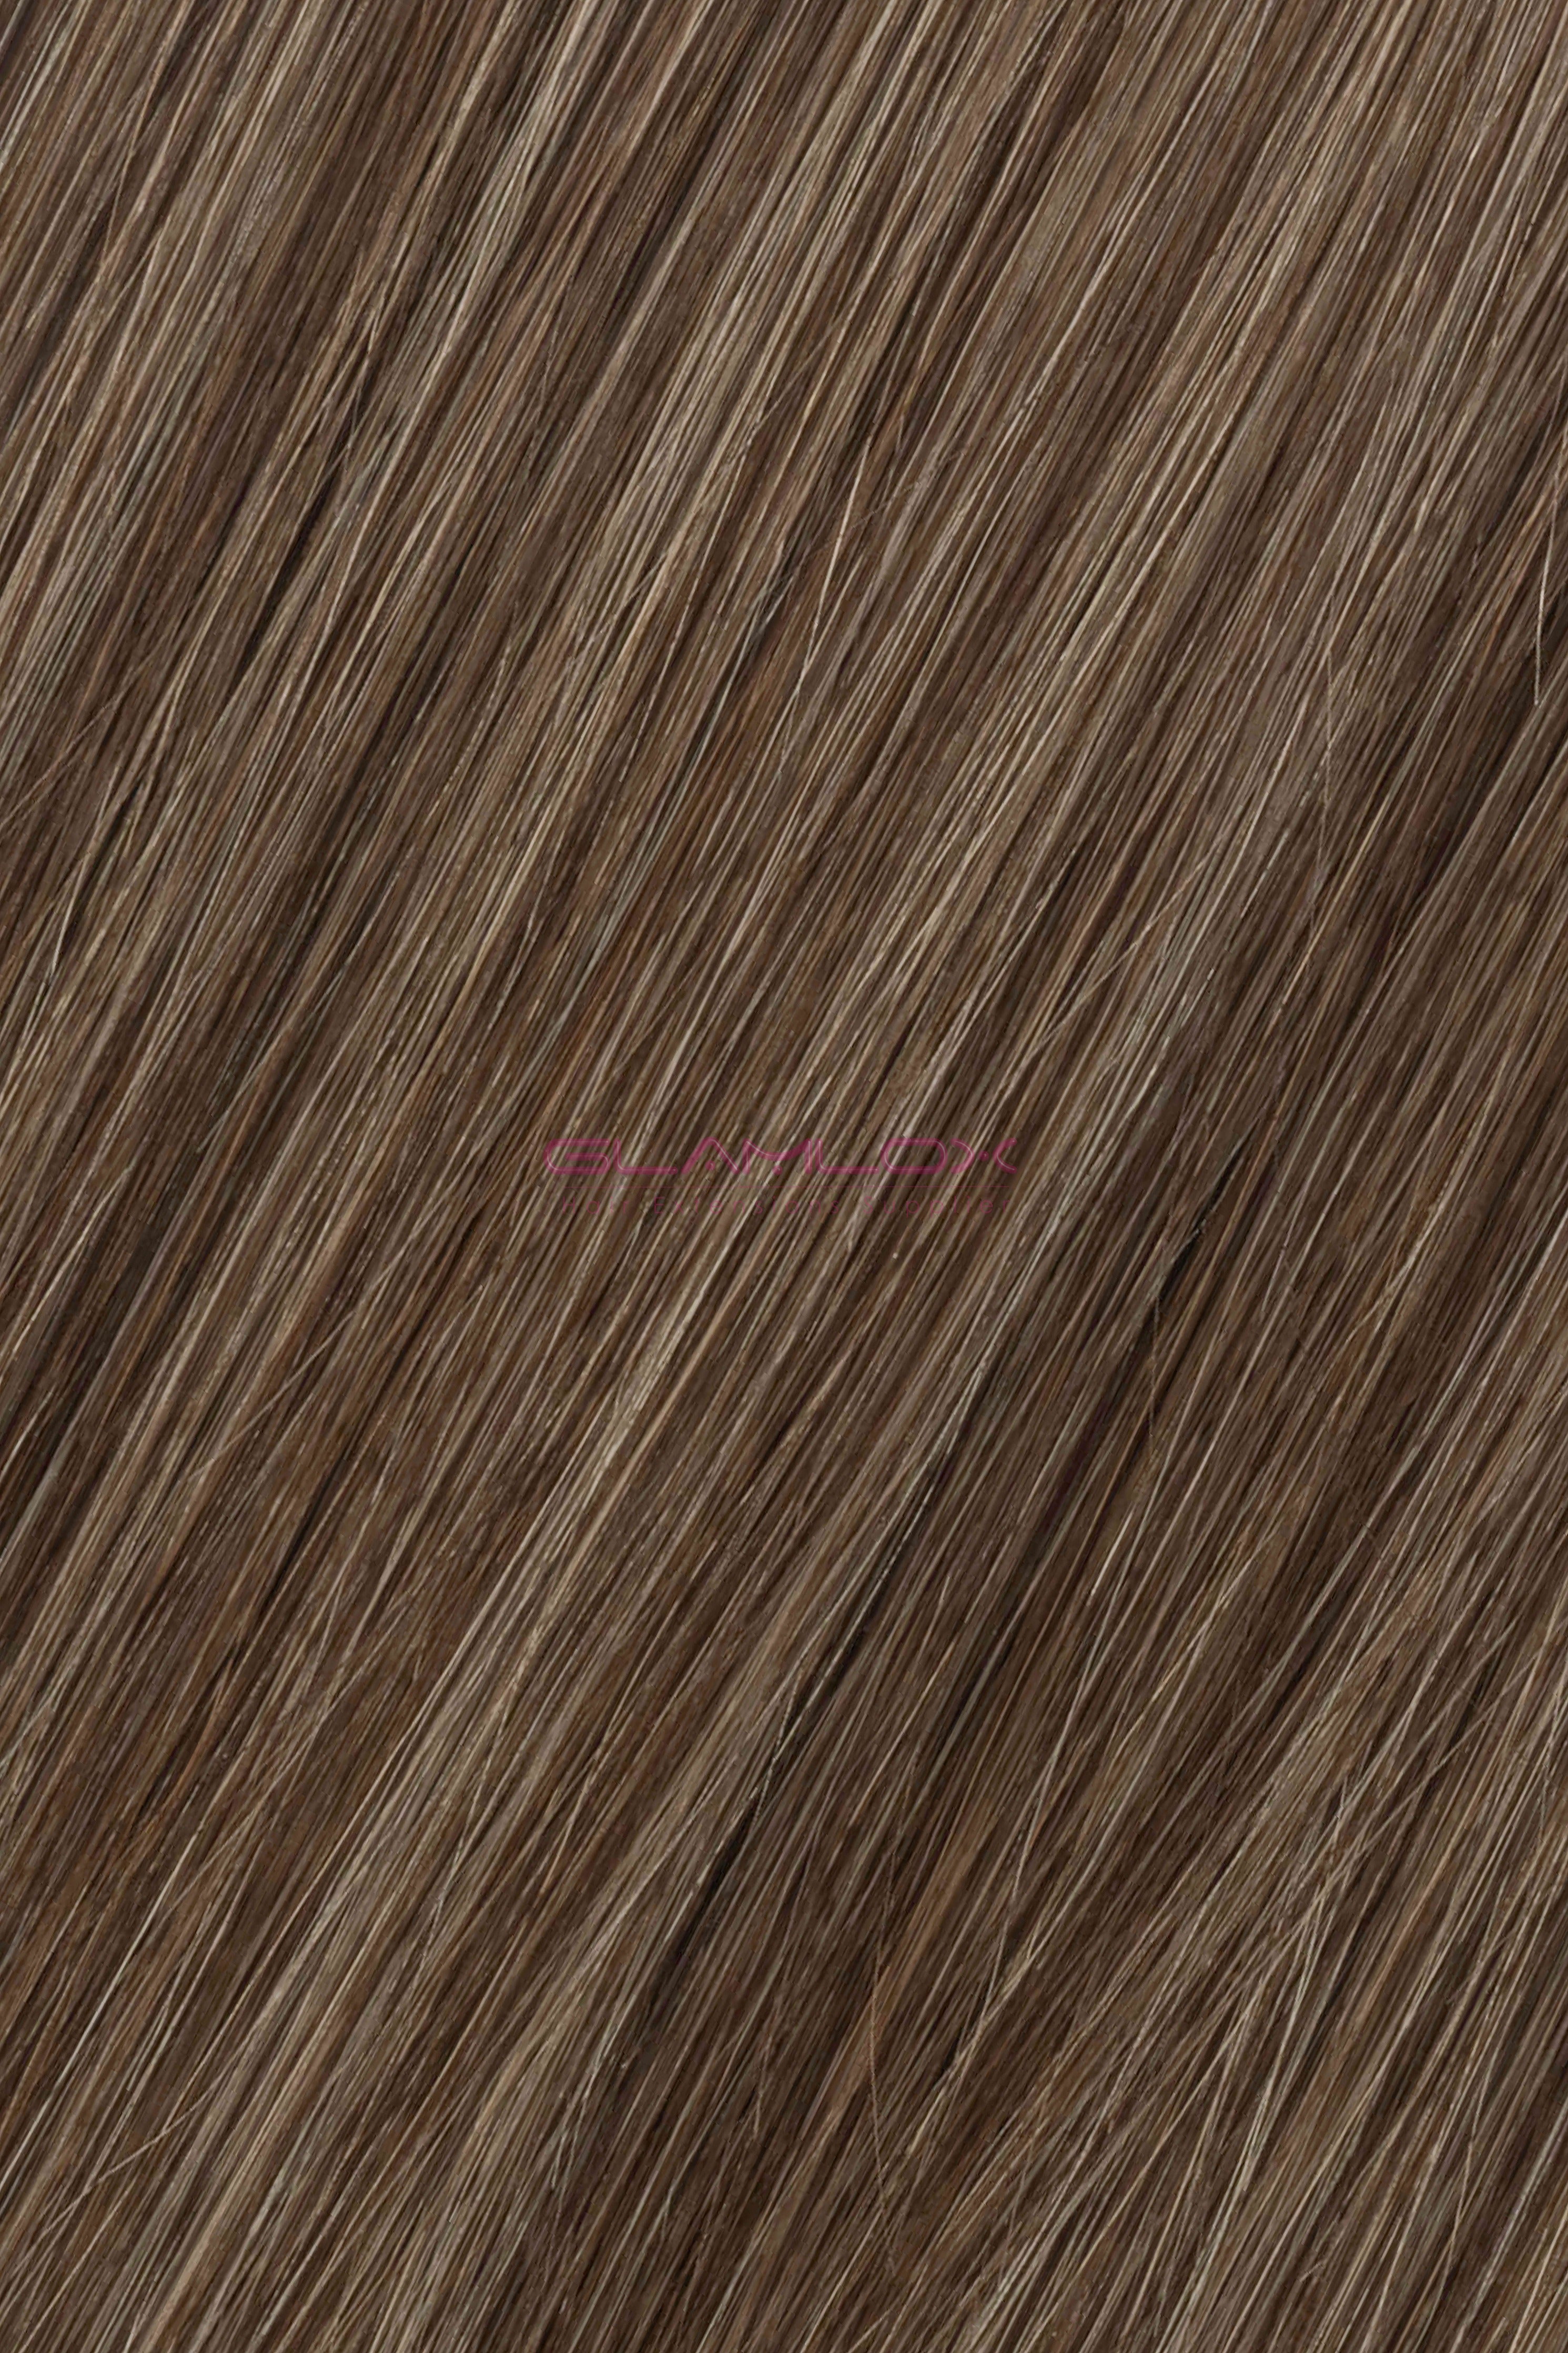 28 - 30" Full Weft Hair Extensions - Russian Mongolian Double Drawn Remy Human Hair